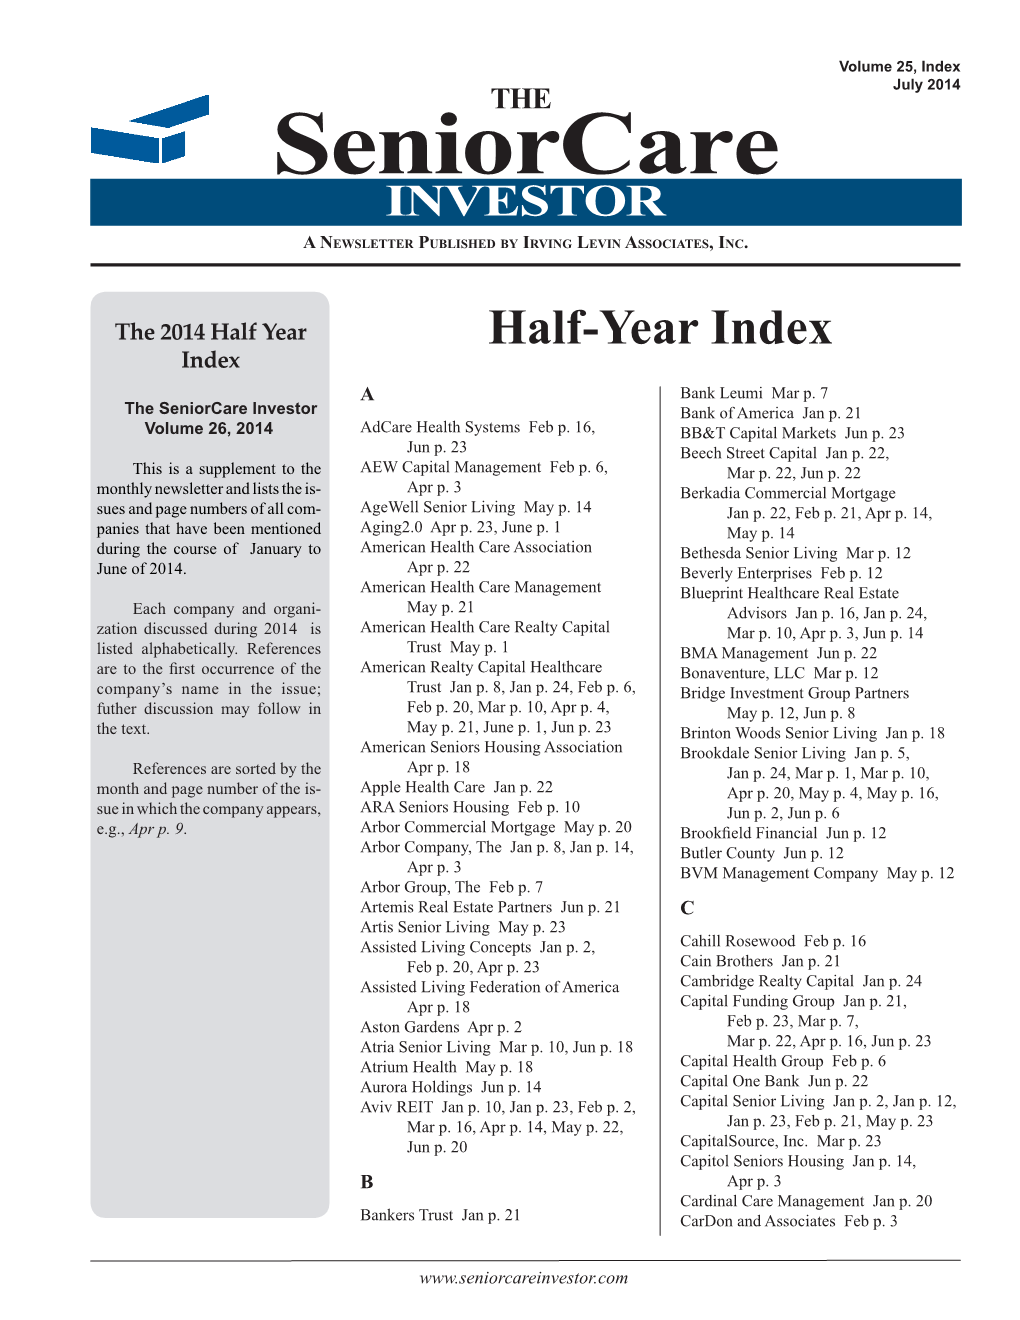 Seniorcare INVESTOR a Newsletter Published by Irving Levin Associates, Inc